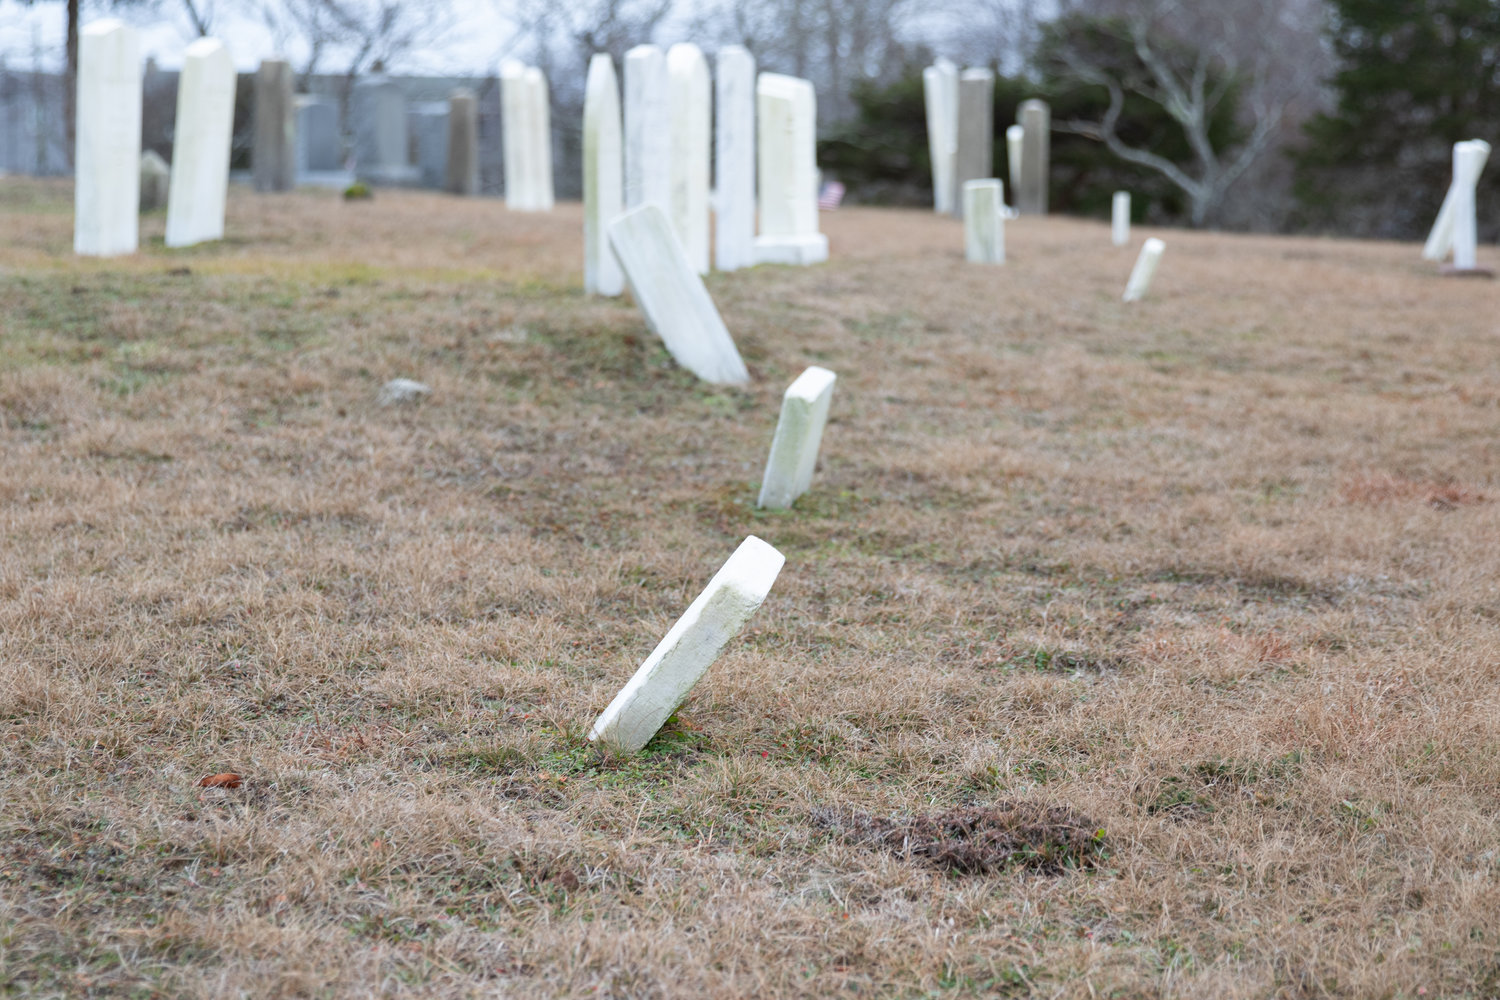 Toppled and leaning monuments in the Historic Colored Cemetery.